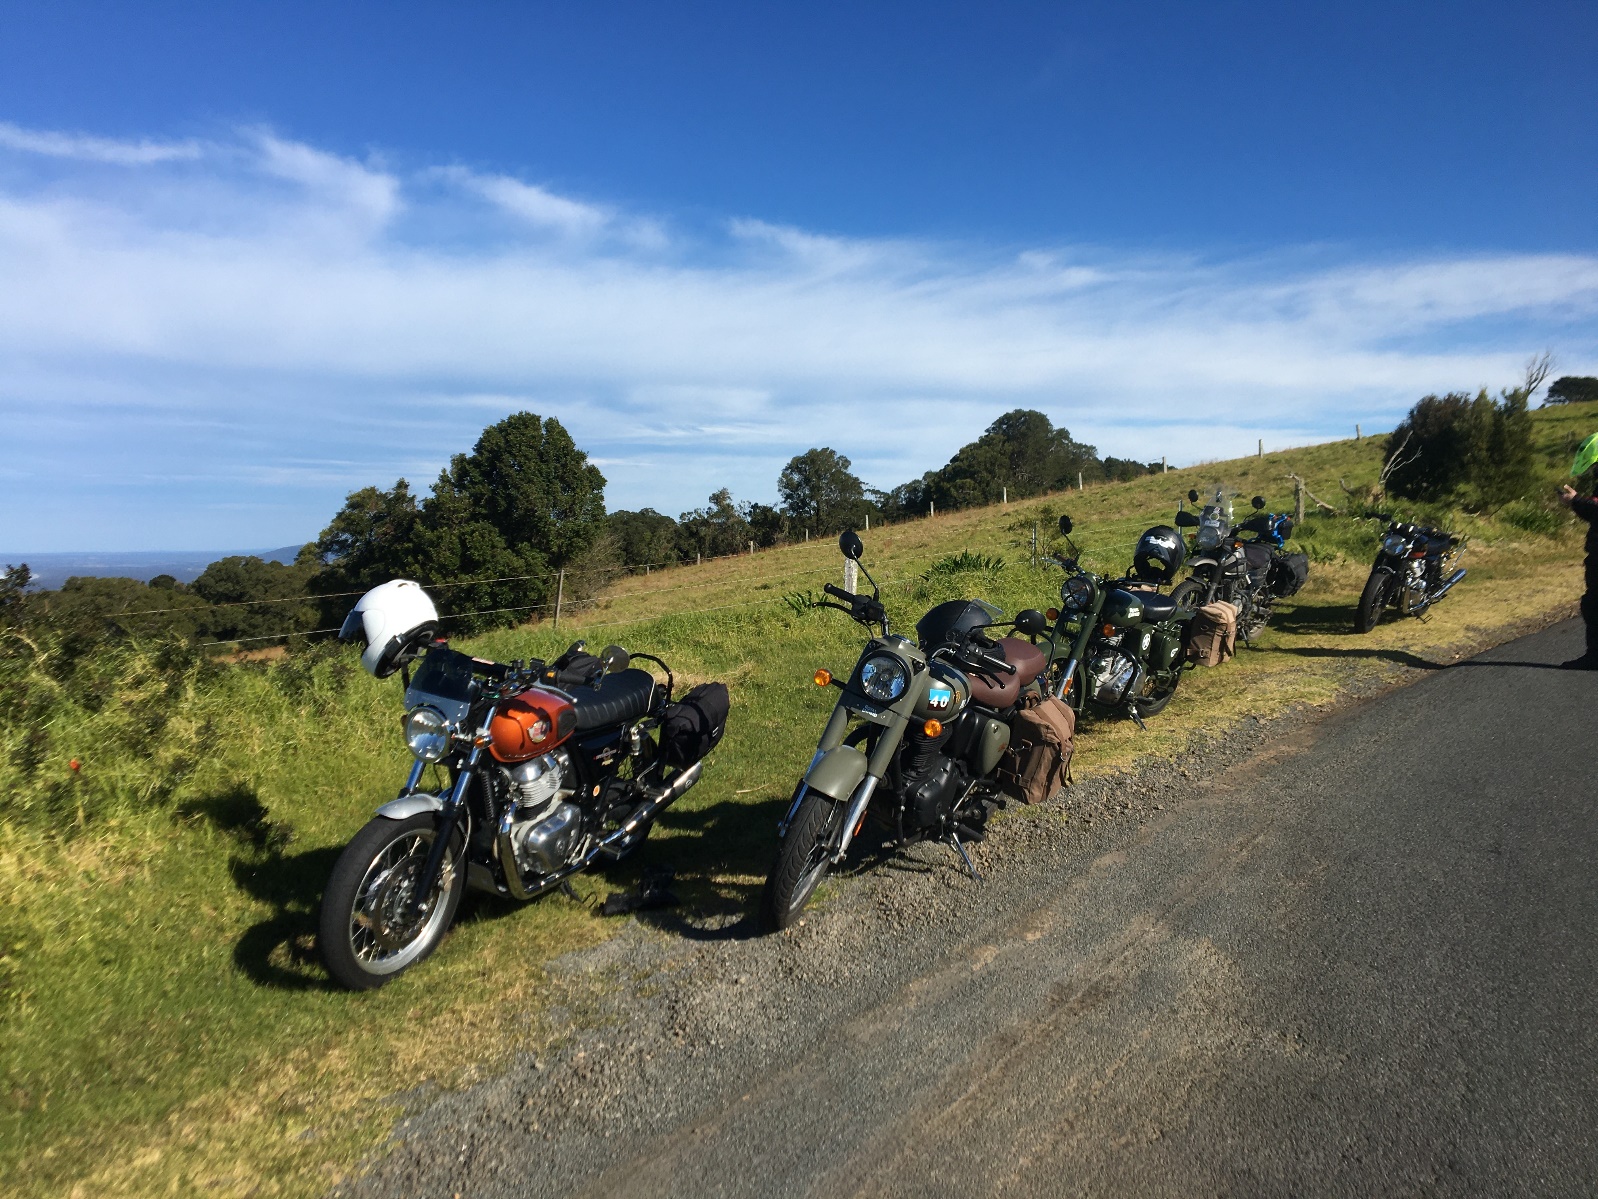 A group of motorcycles parked on a road Description automatically generated with low confidence